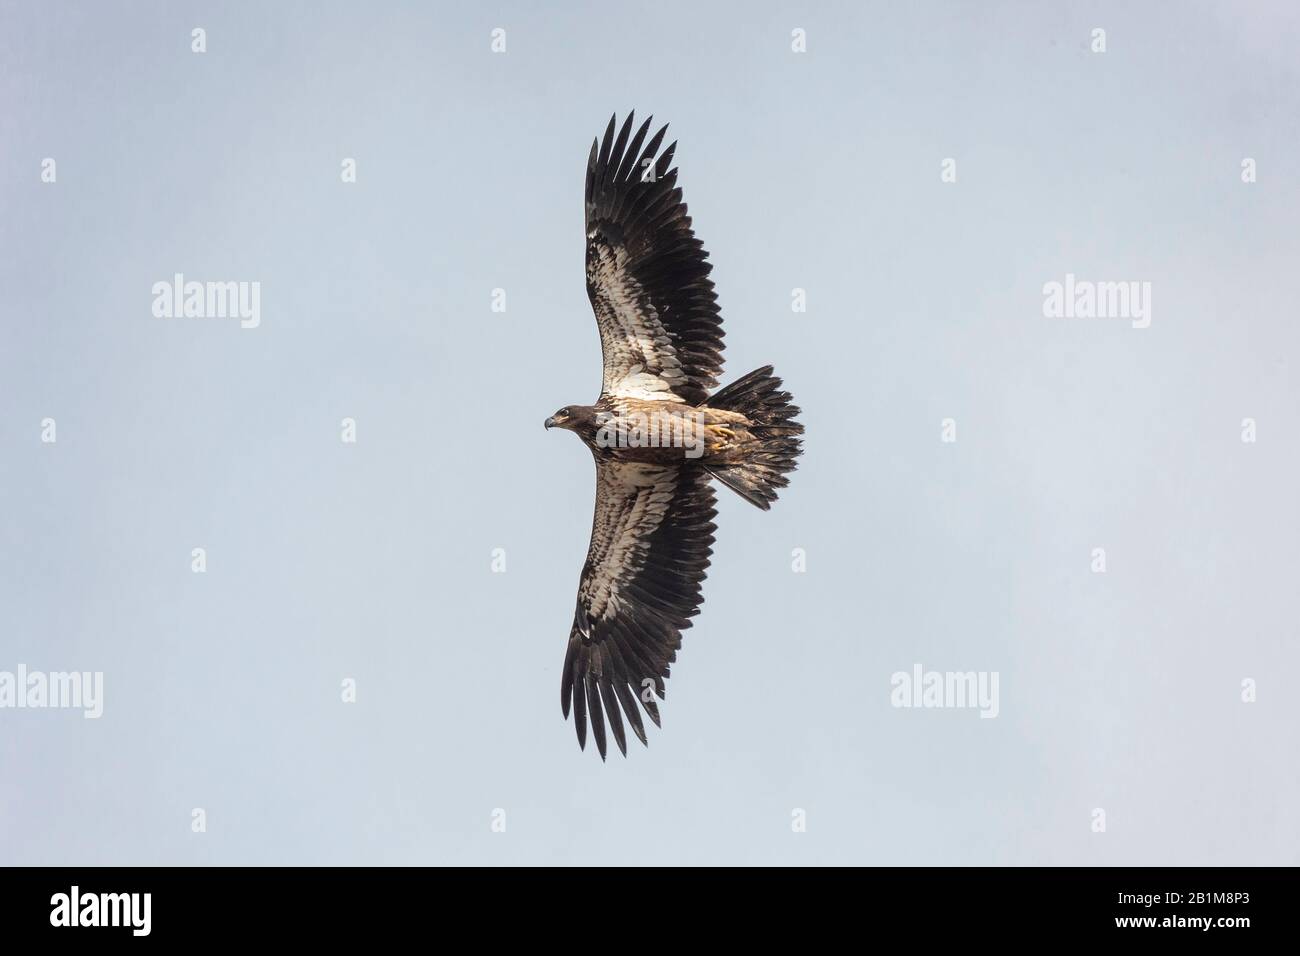 Flying juvenile Bald eagle in Vancouver BC Canada. Stock Photo